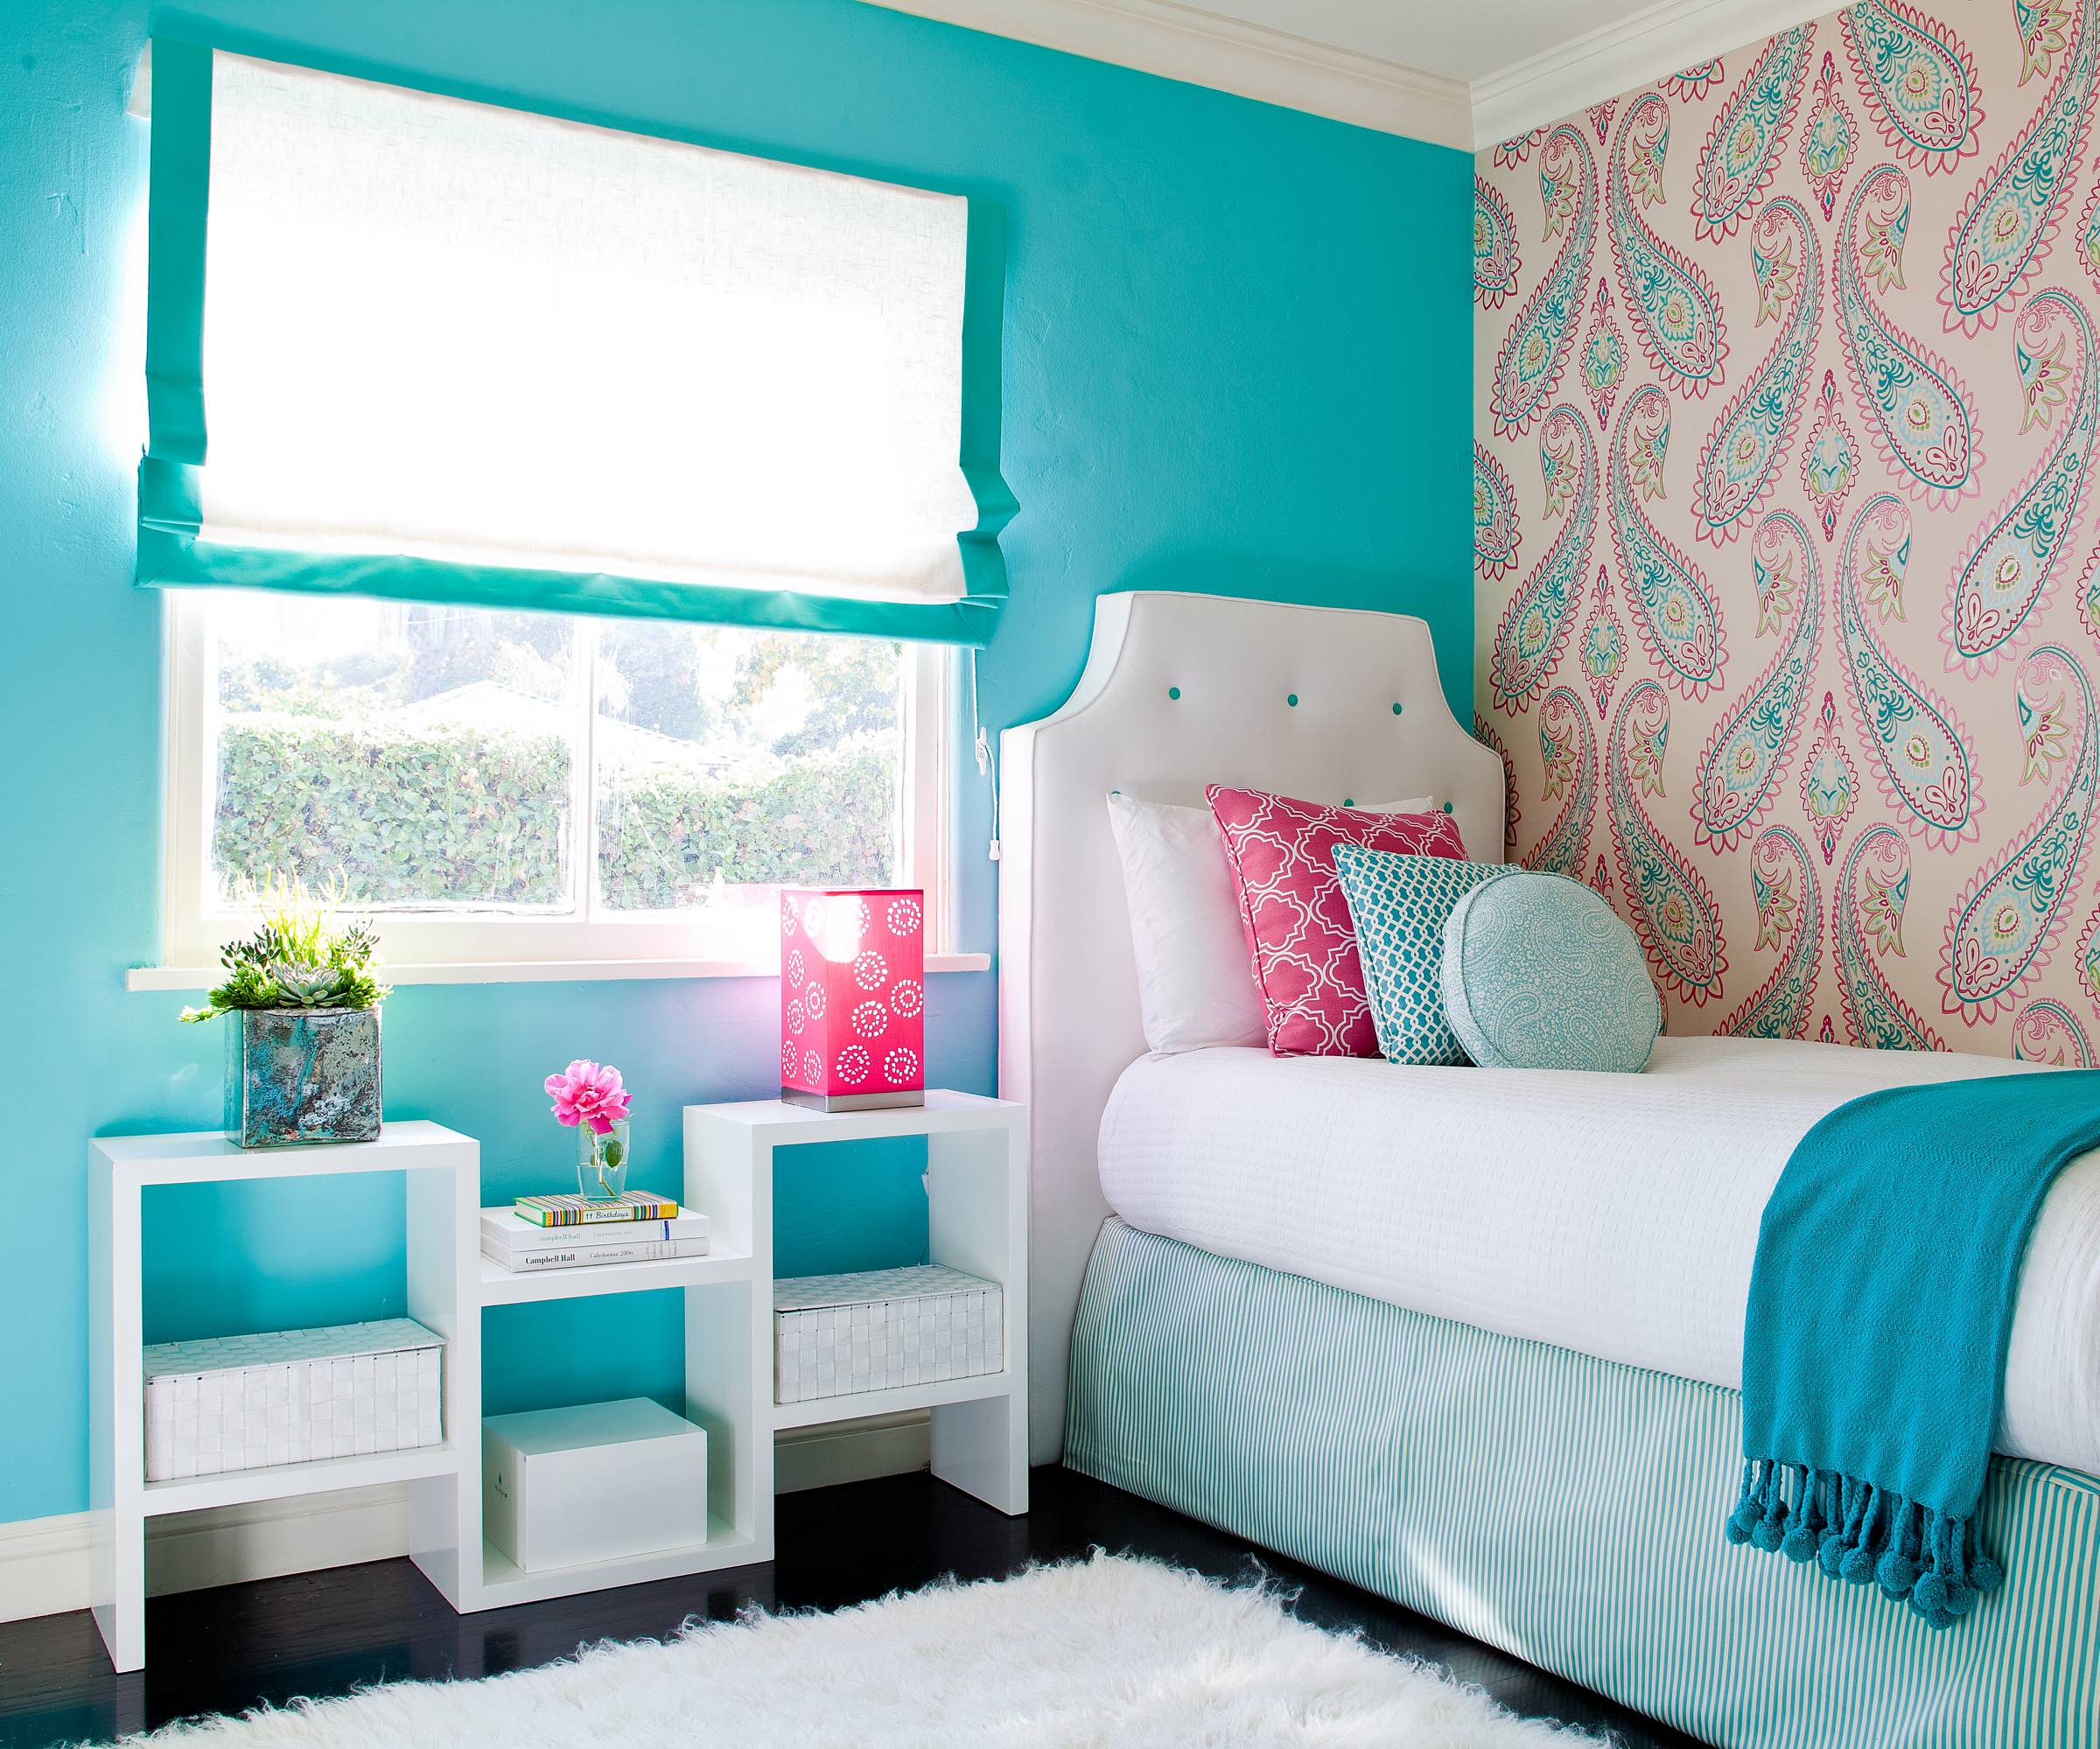 75 Beautiful Kids Room Pictures Ideas Color Turquoise July 2021 Houzz